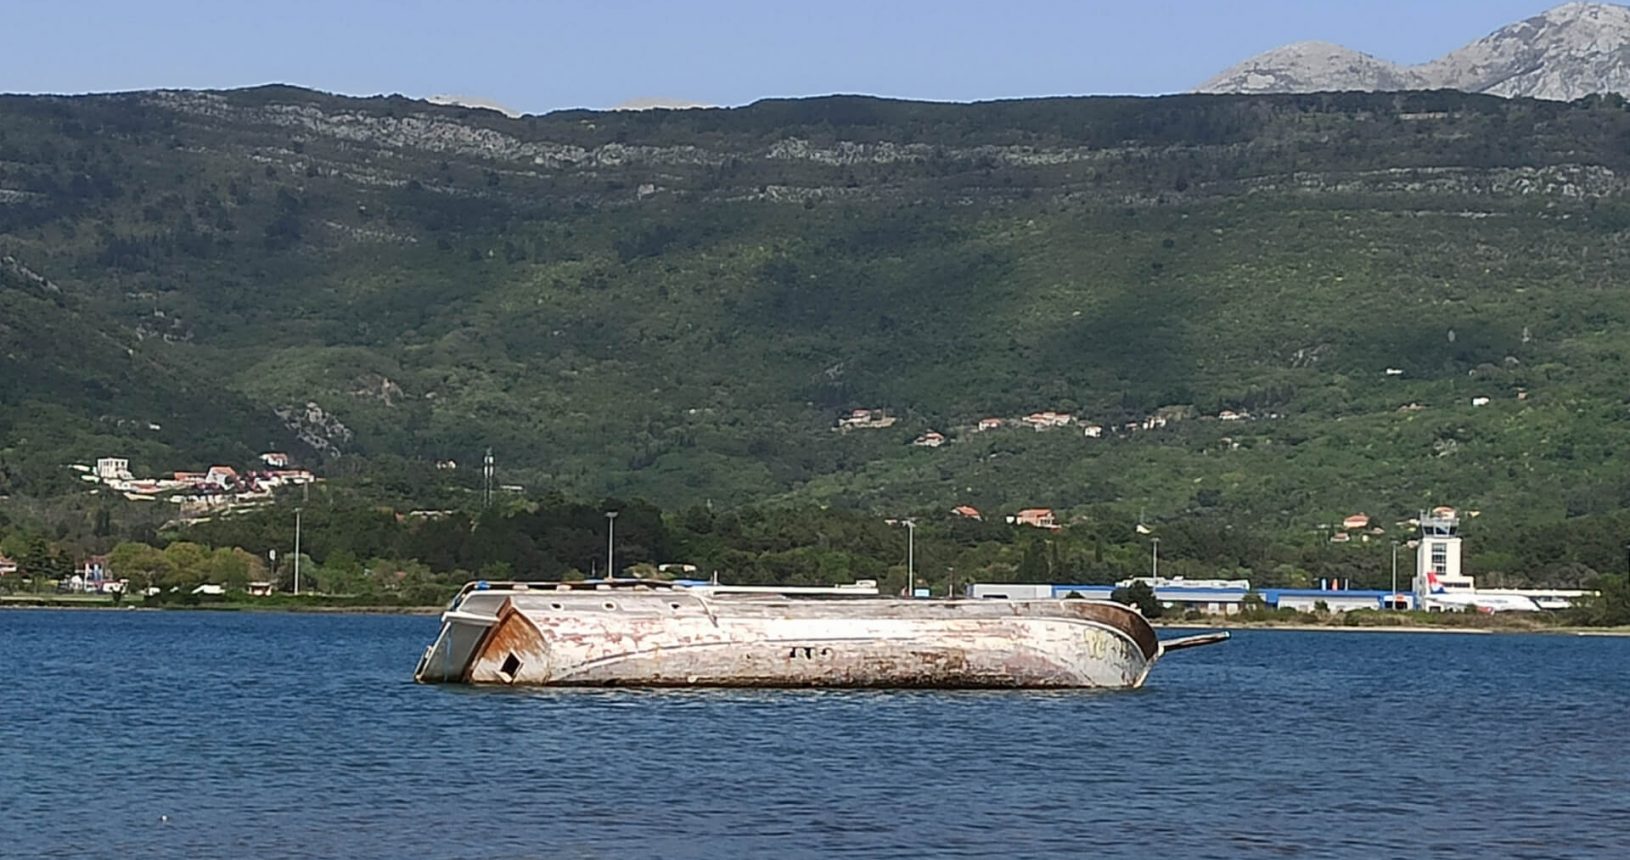 Abandoned big boat. The island of flowers